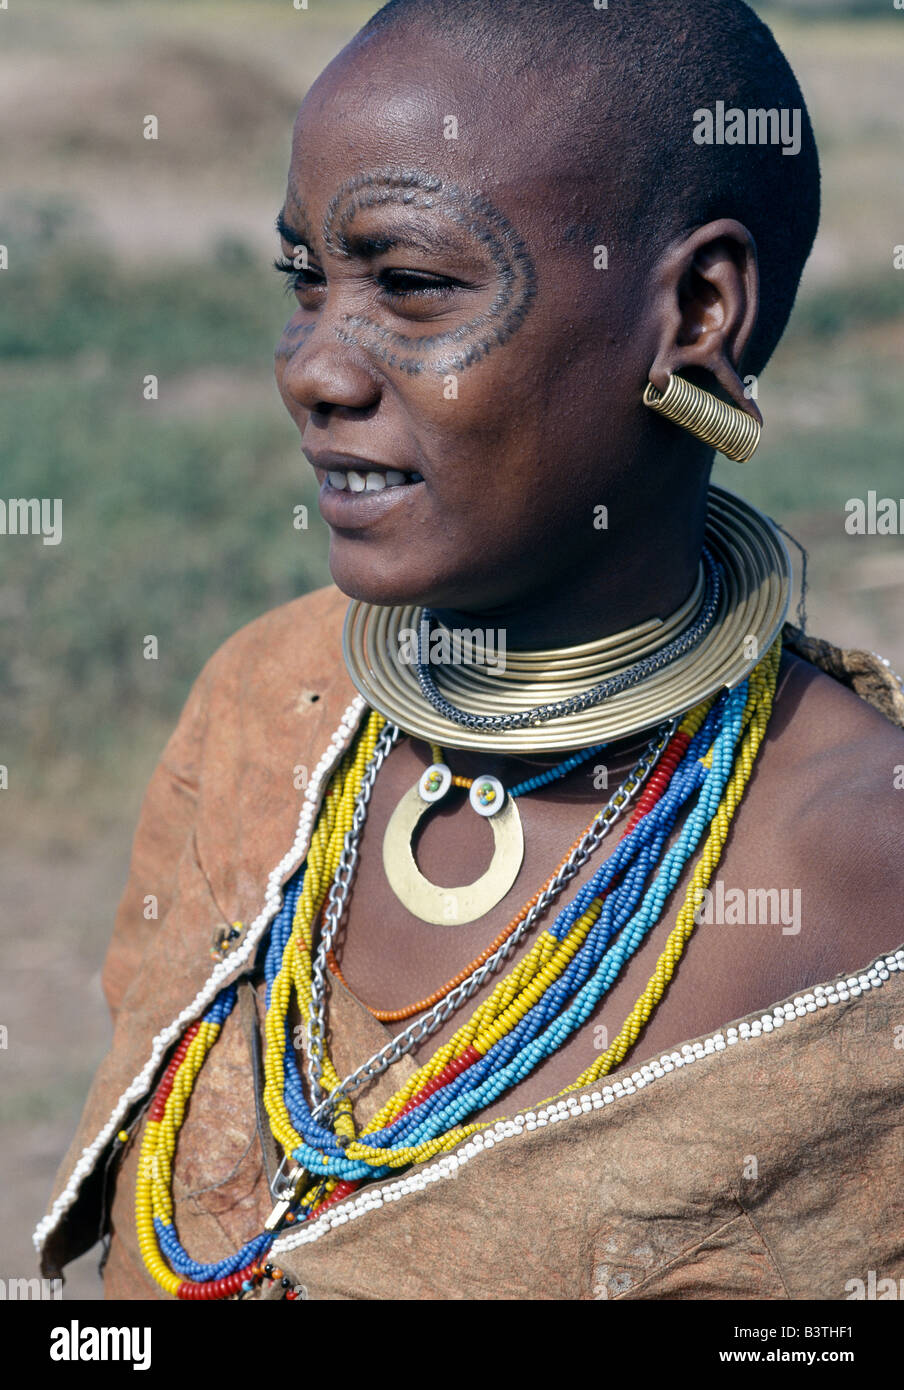 Tanzania, Arusha, Lake Eyasi. A Datoga woman in traditional attire, which includes beautifully tanned and decorated leather dresses and coiled brass necklaces and ear ornaments. Yellow and light blue are the preferred colours of the beads they wear. Extensive scarification of the face with raised circular patterns is not uncommon among women and girls.The Datoga (known to their Maasai neighbours as the Mang'ati and to the Iraqw as Babaraig) live in northern Tanzania and are primarily pastoralists Stock Photo